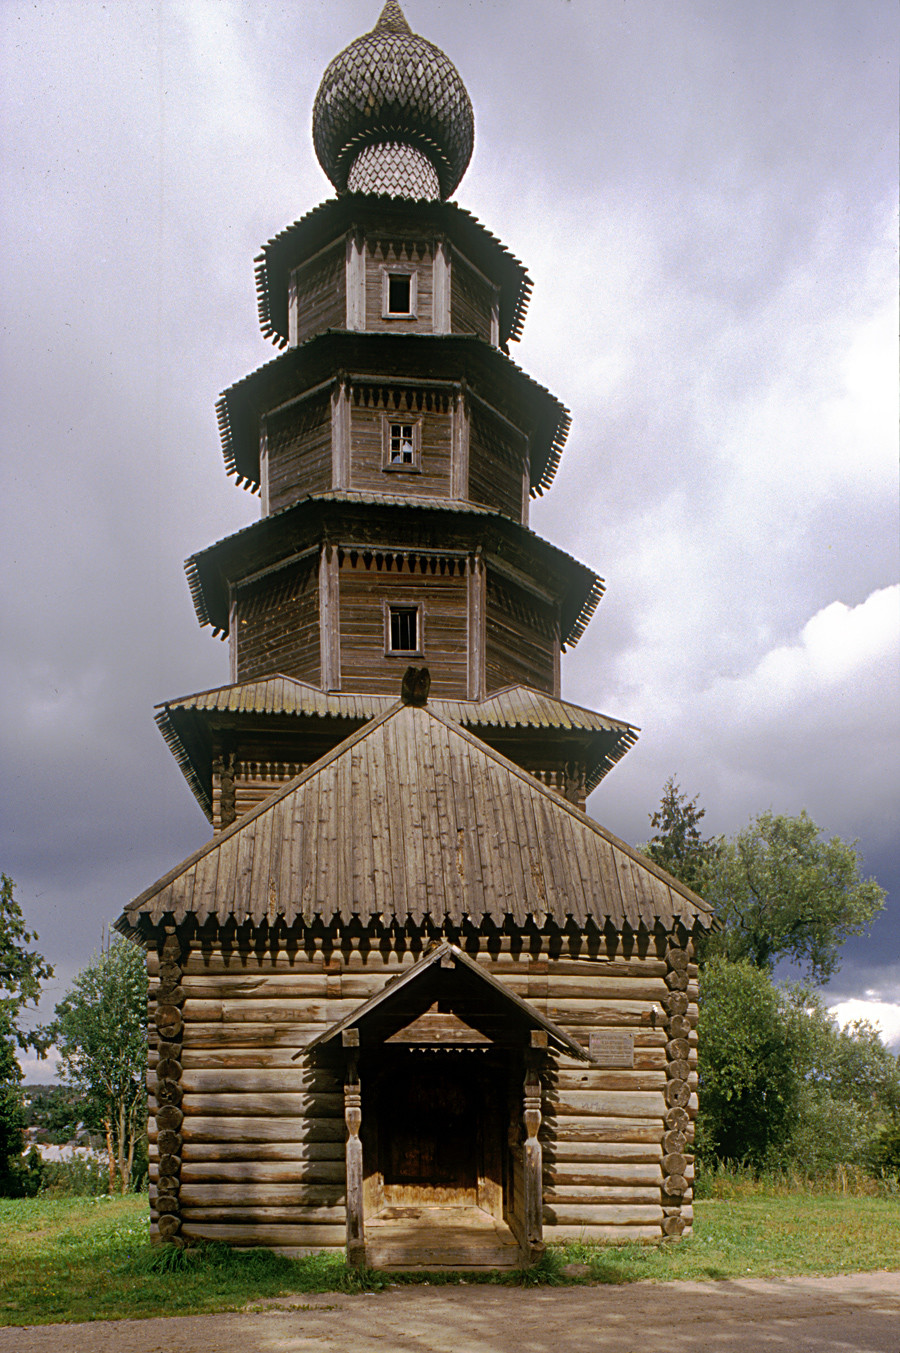 Church of the Tikhvin Icon (Old Church of the Ascension), west view with entrance porch. Aug. 13, 1995.